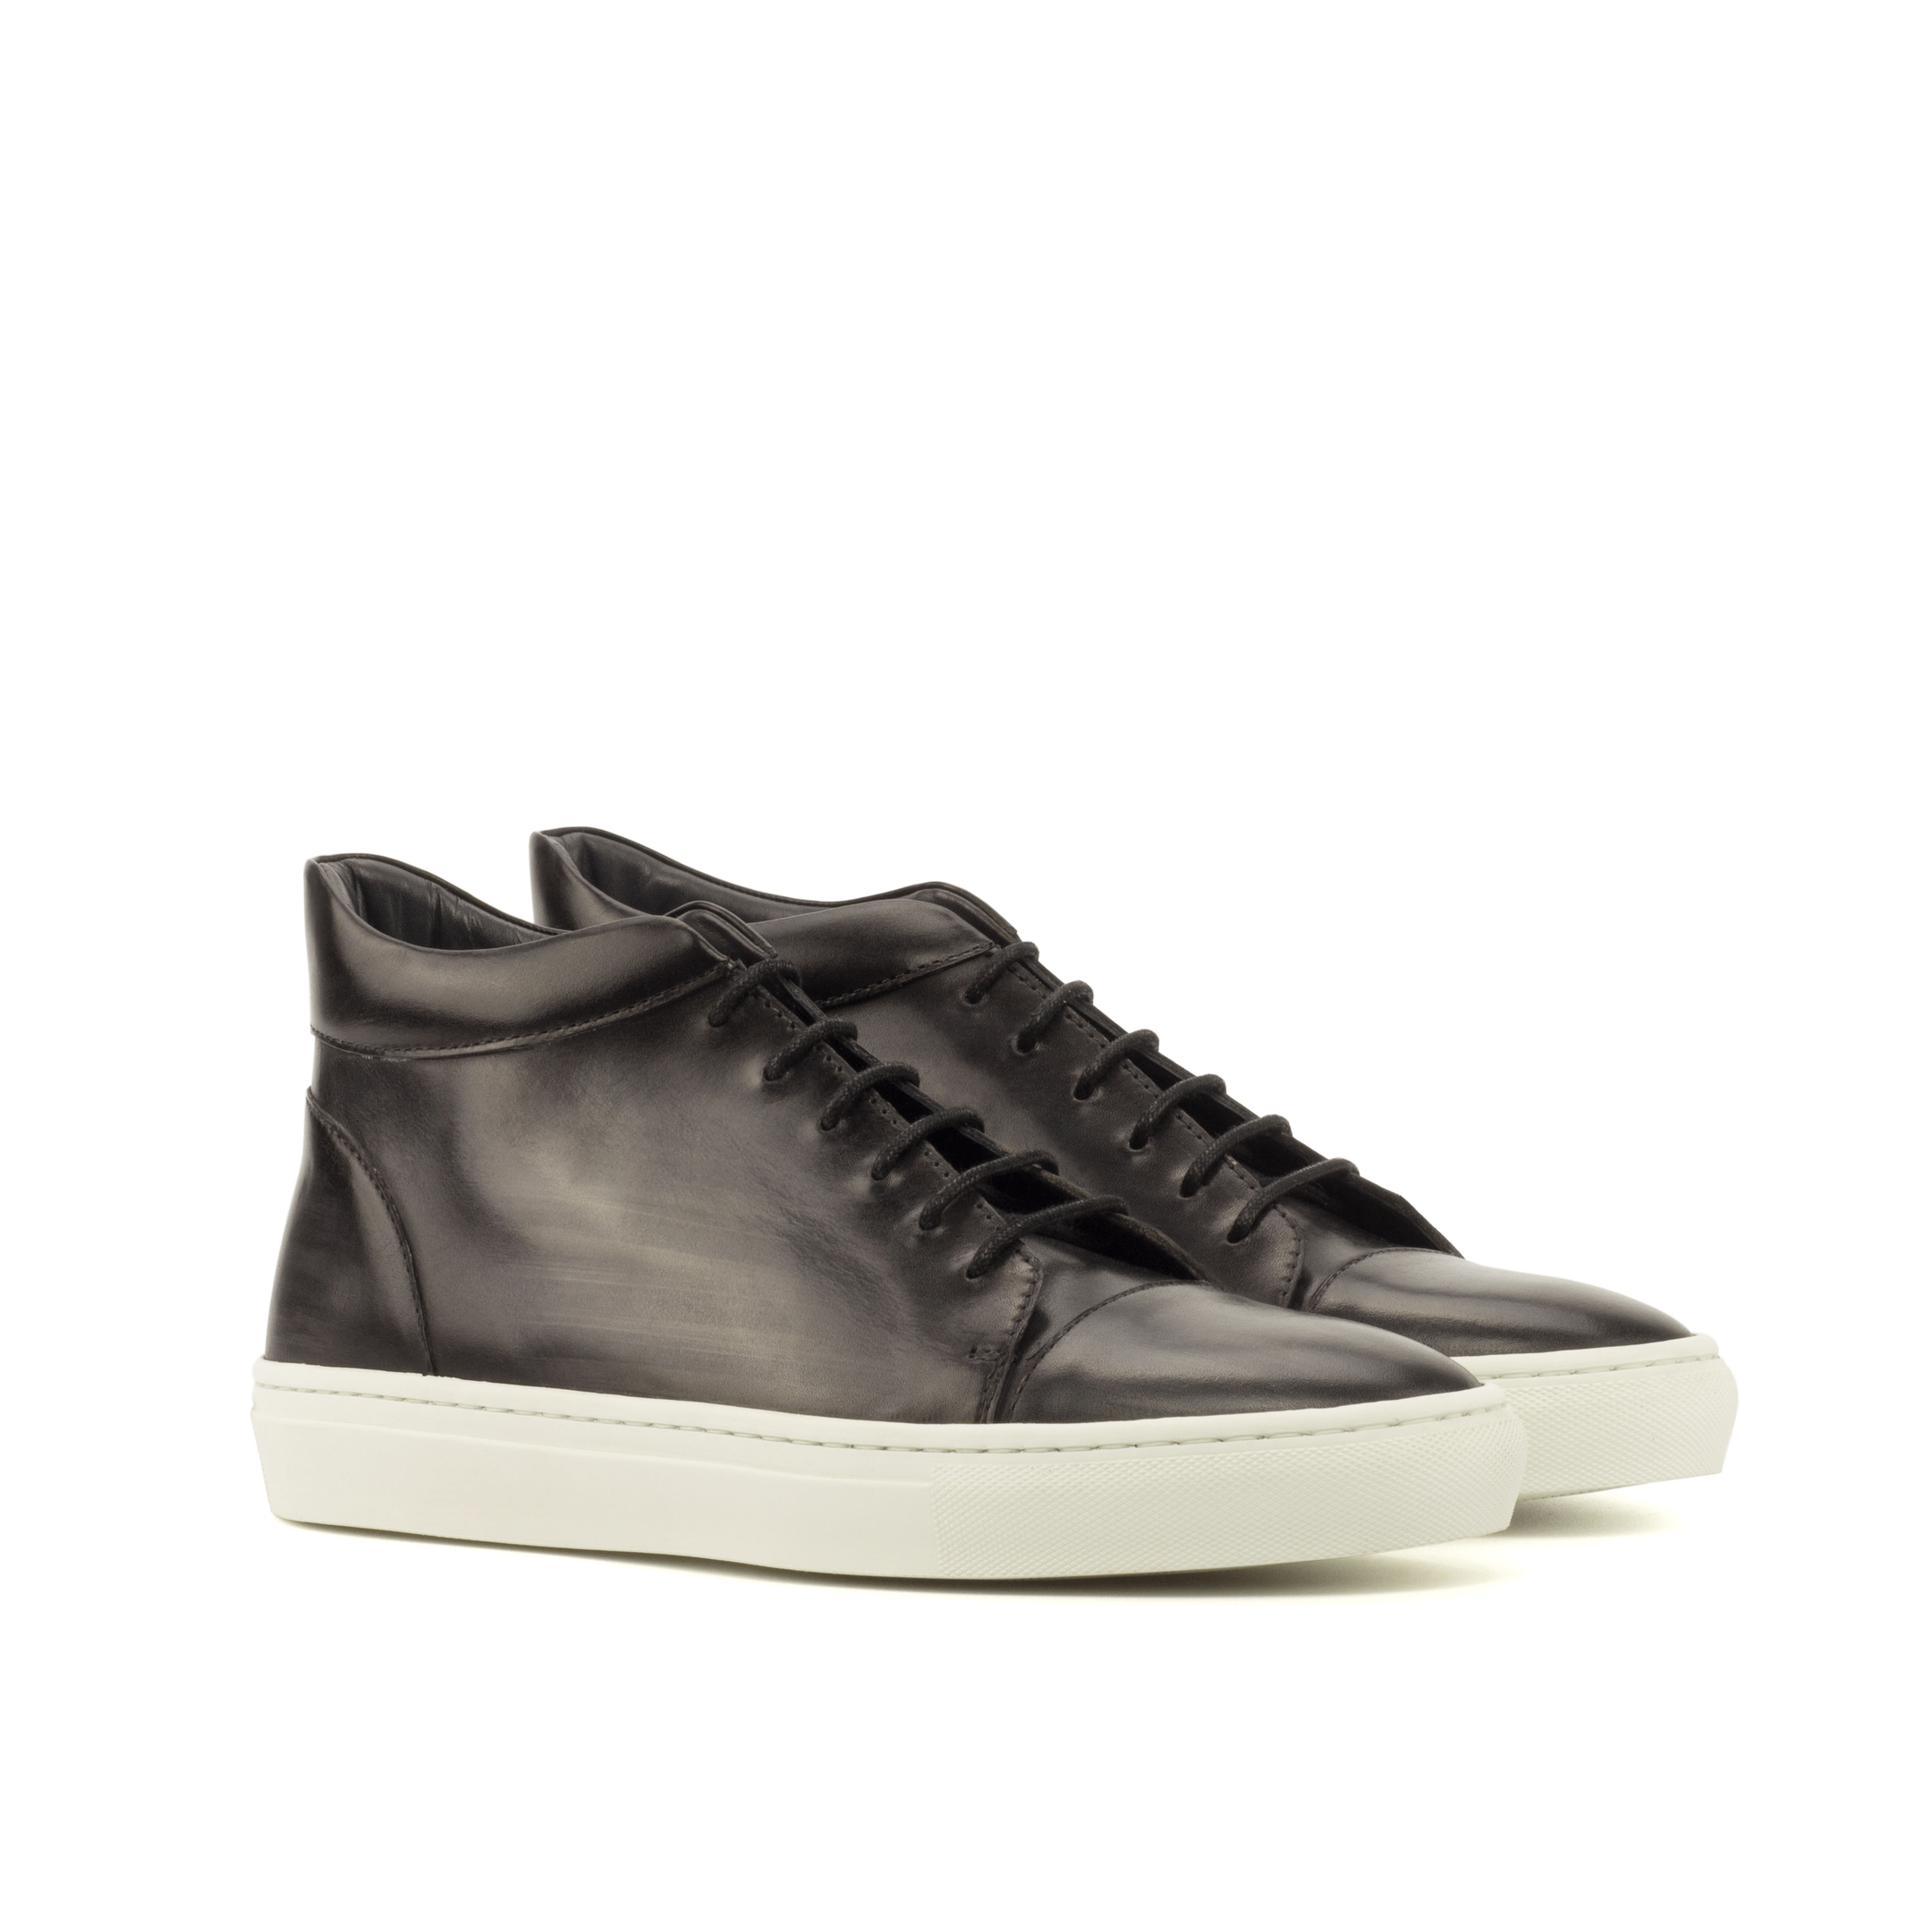 Donny Patina high top sneakers